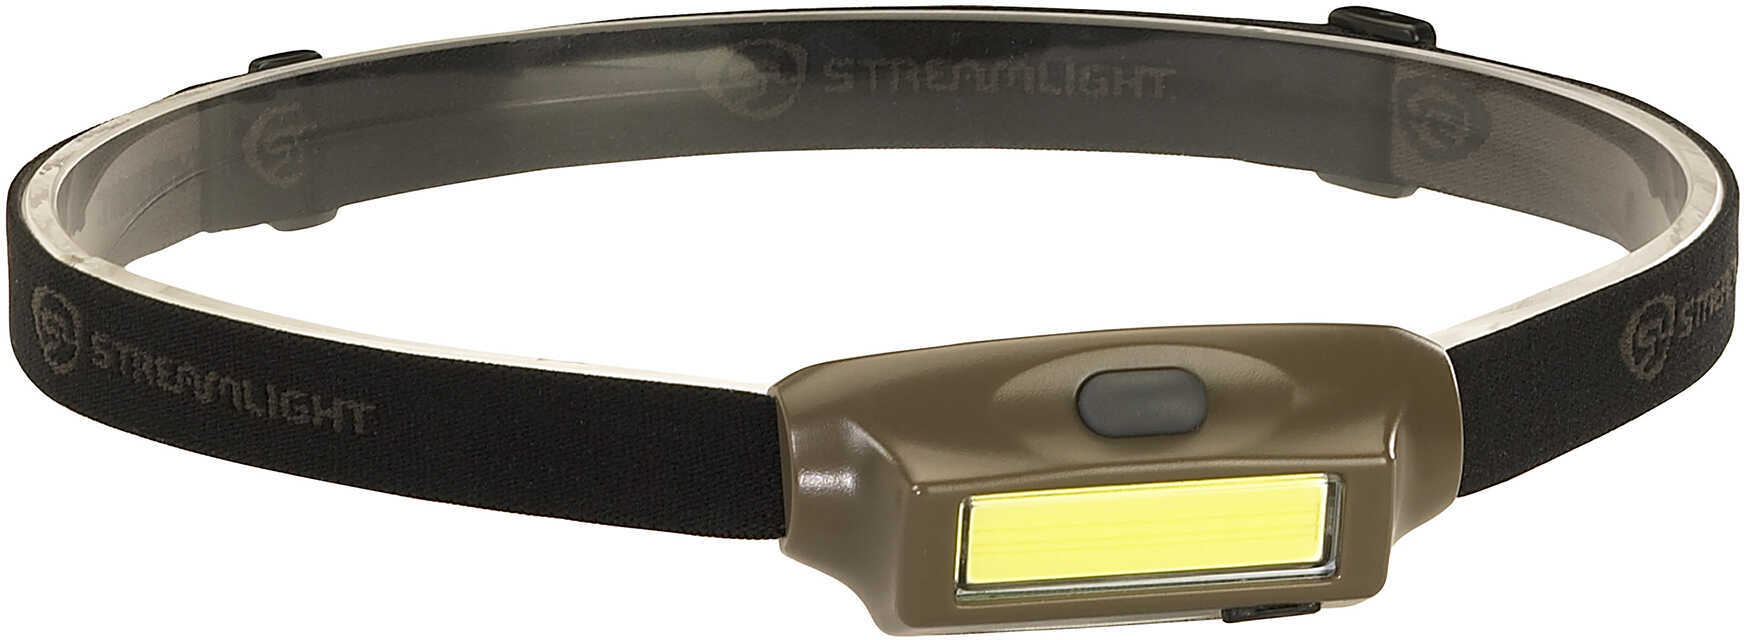 Streamlight Bandit Headlamp 180 Lumens White/Red LED Coyote Brown Finish 61706